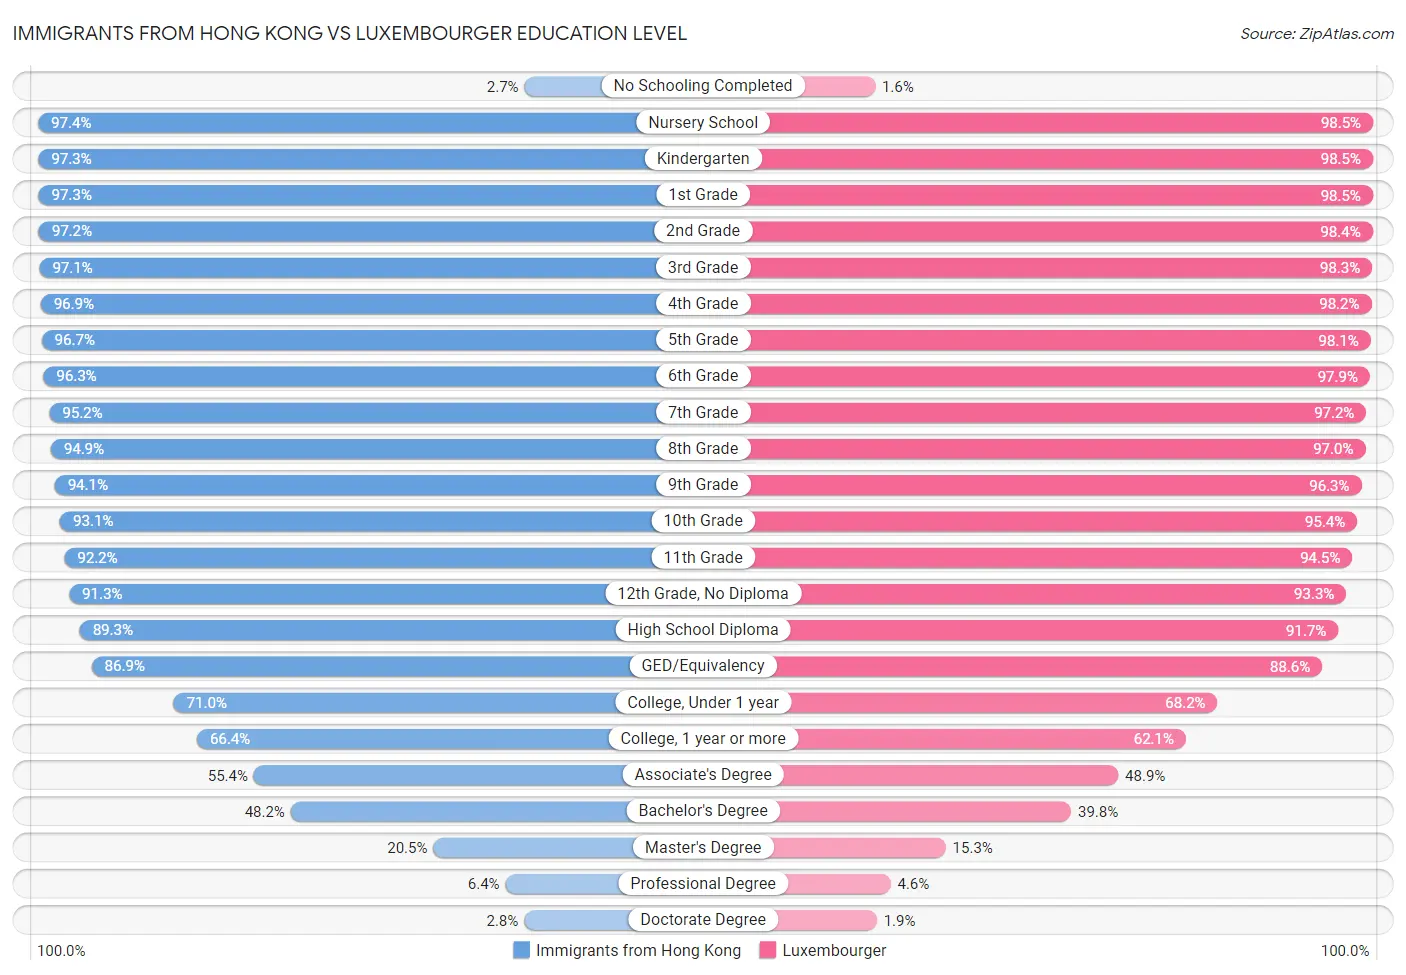 Immigrants from Hong Kong vs Luxembourger Education Level